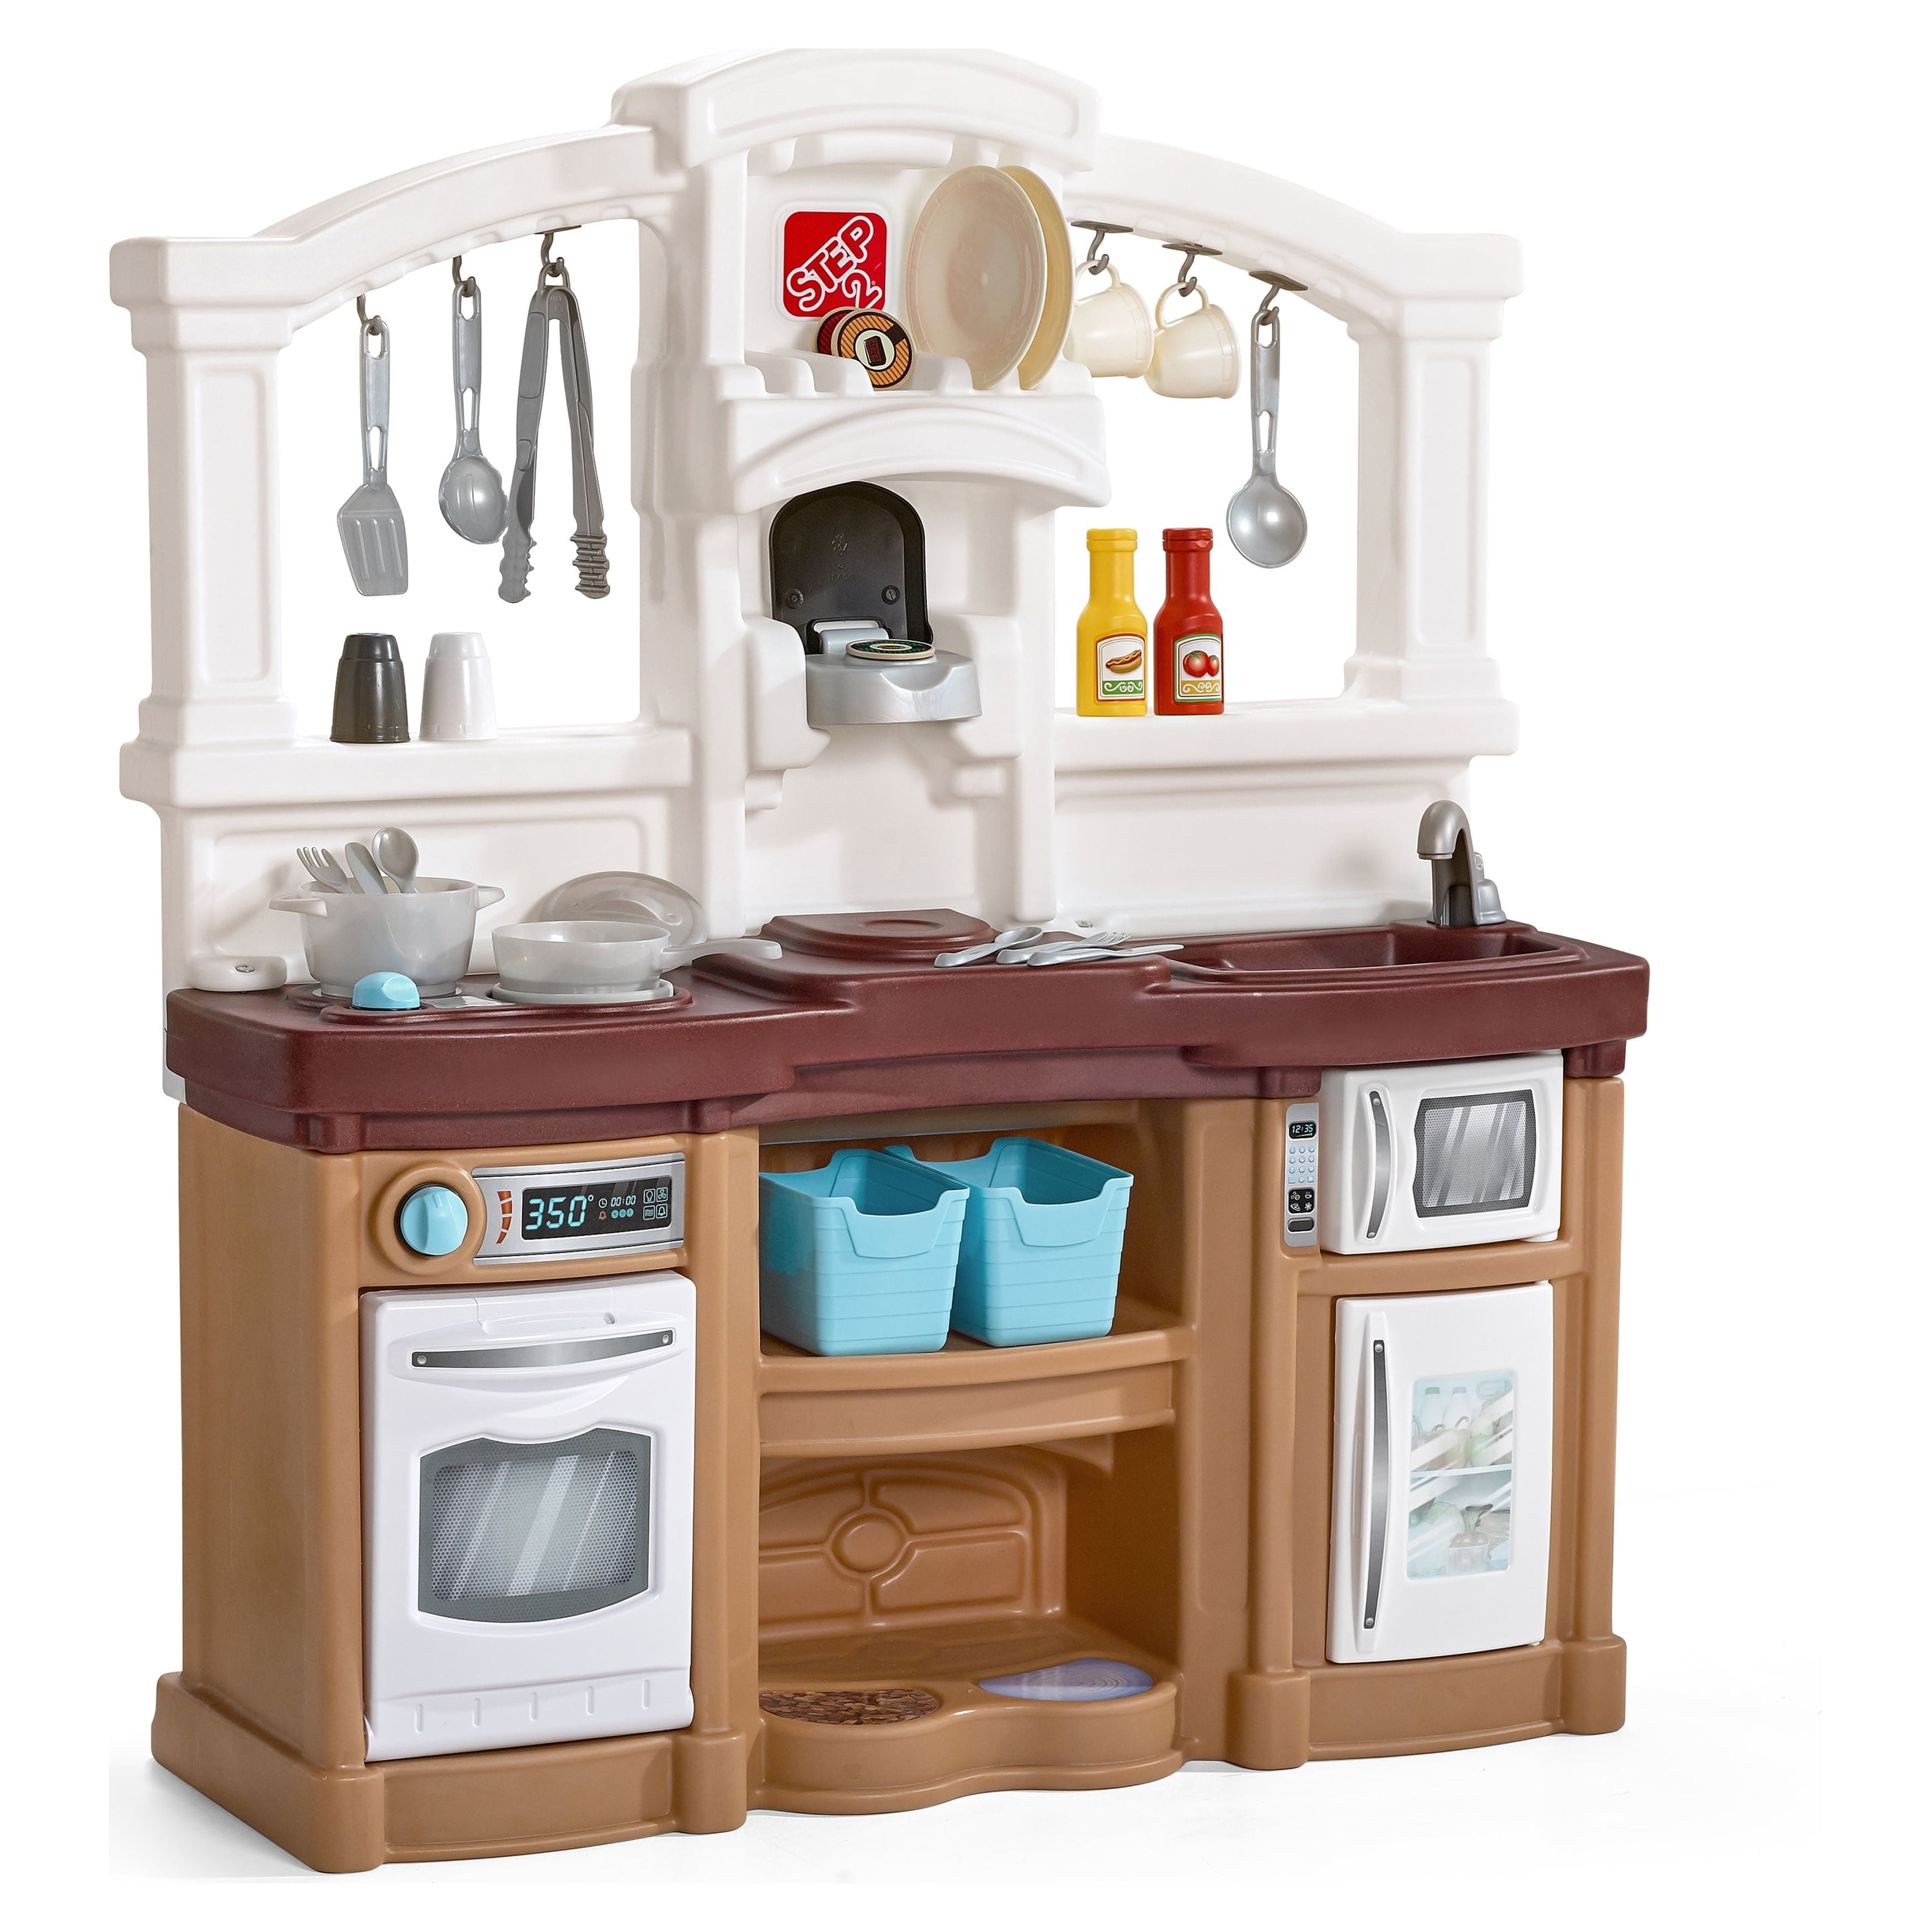 Step2 Fun With Friends Tan Toddler Plastic Kitchen Play Set 5e9e24ca 4987 4c5f 8220 1e0ea283f9ea.5c82cf9558e34dbfd6a9ca4a99c97a08 